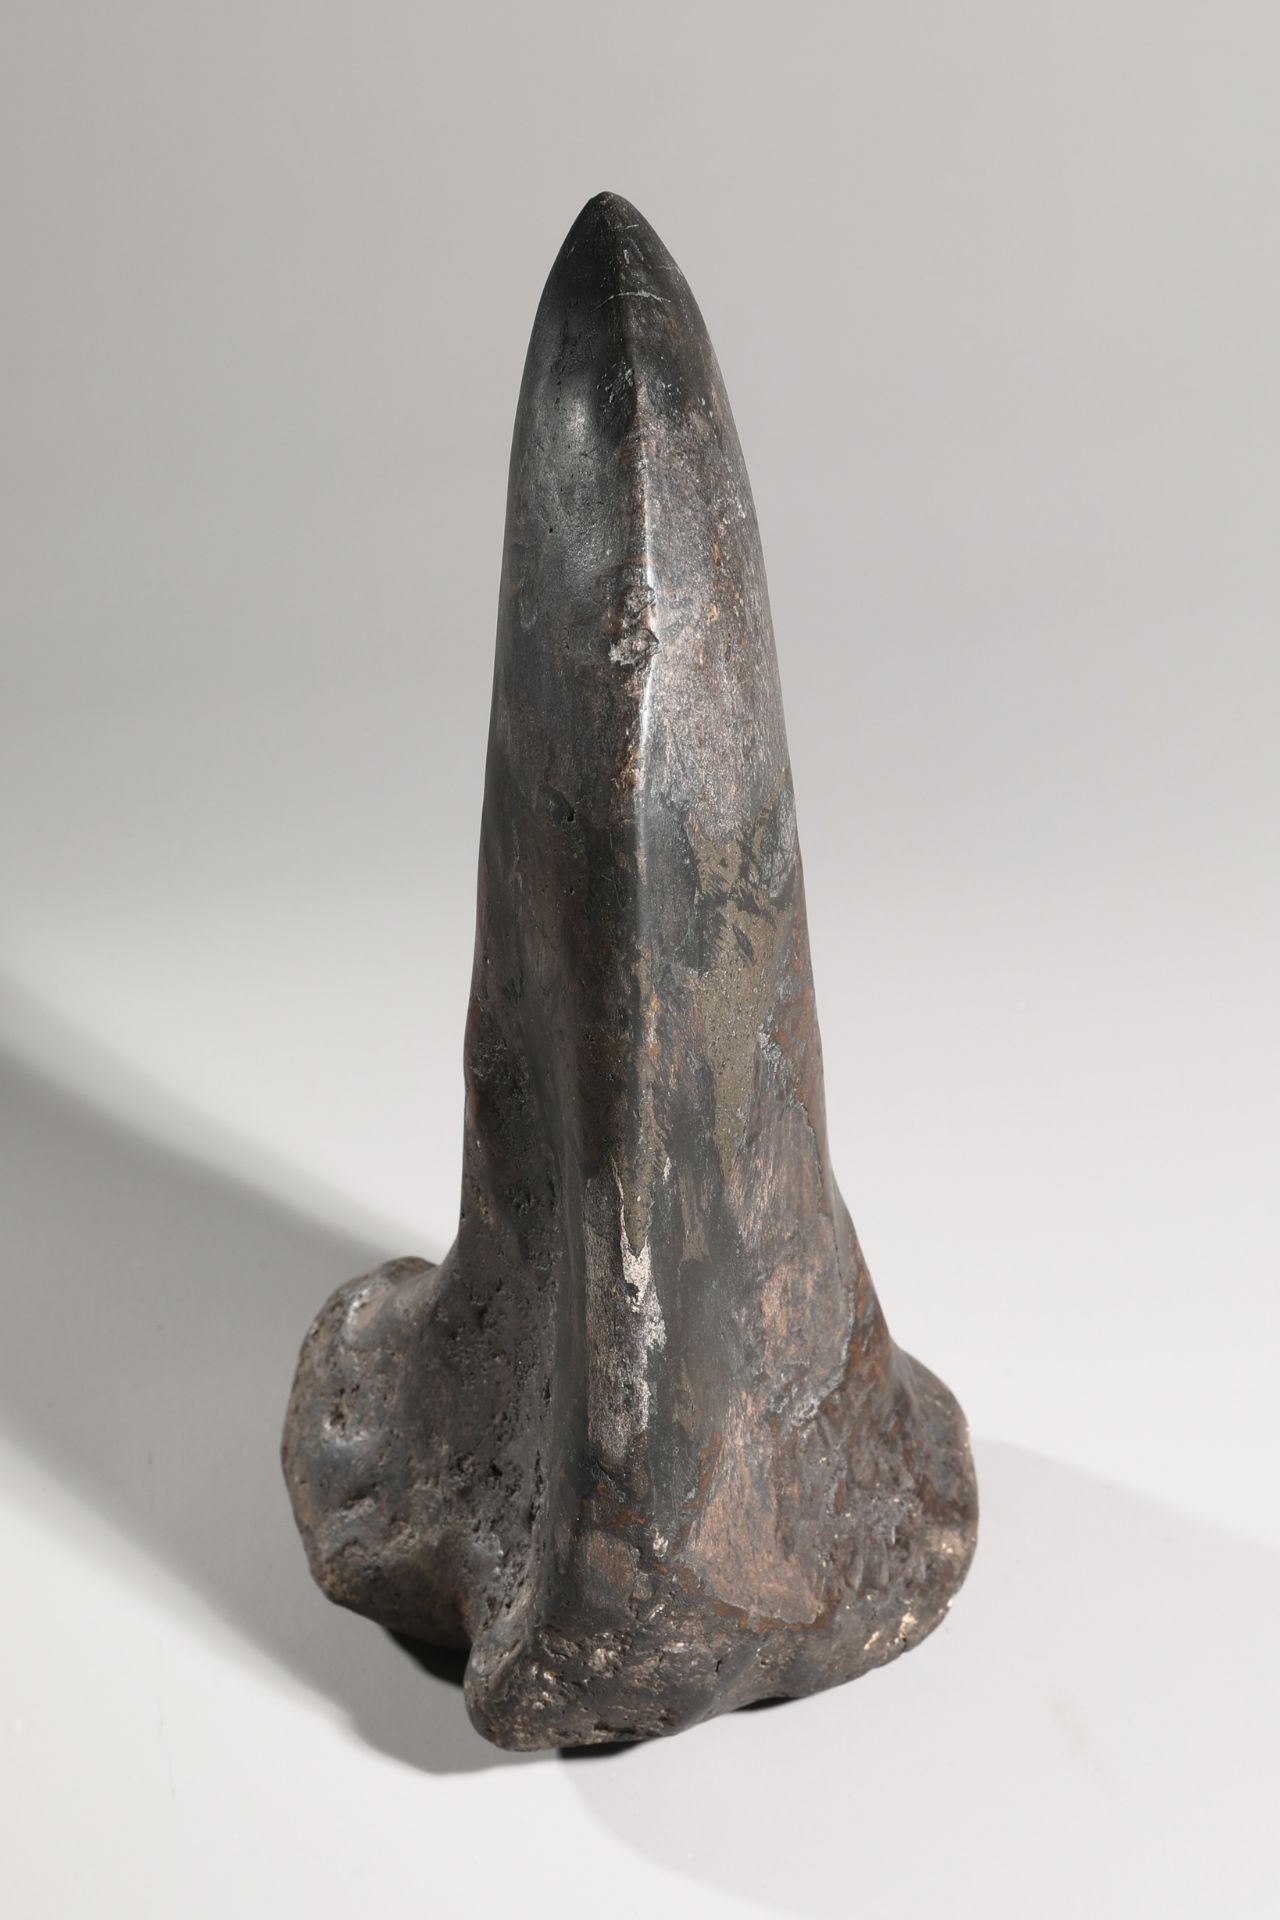 Dinosaur claw, fossilized - Image 2 of 4